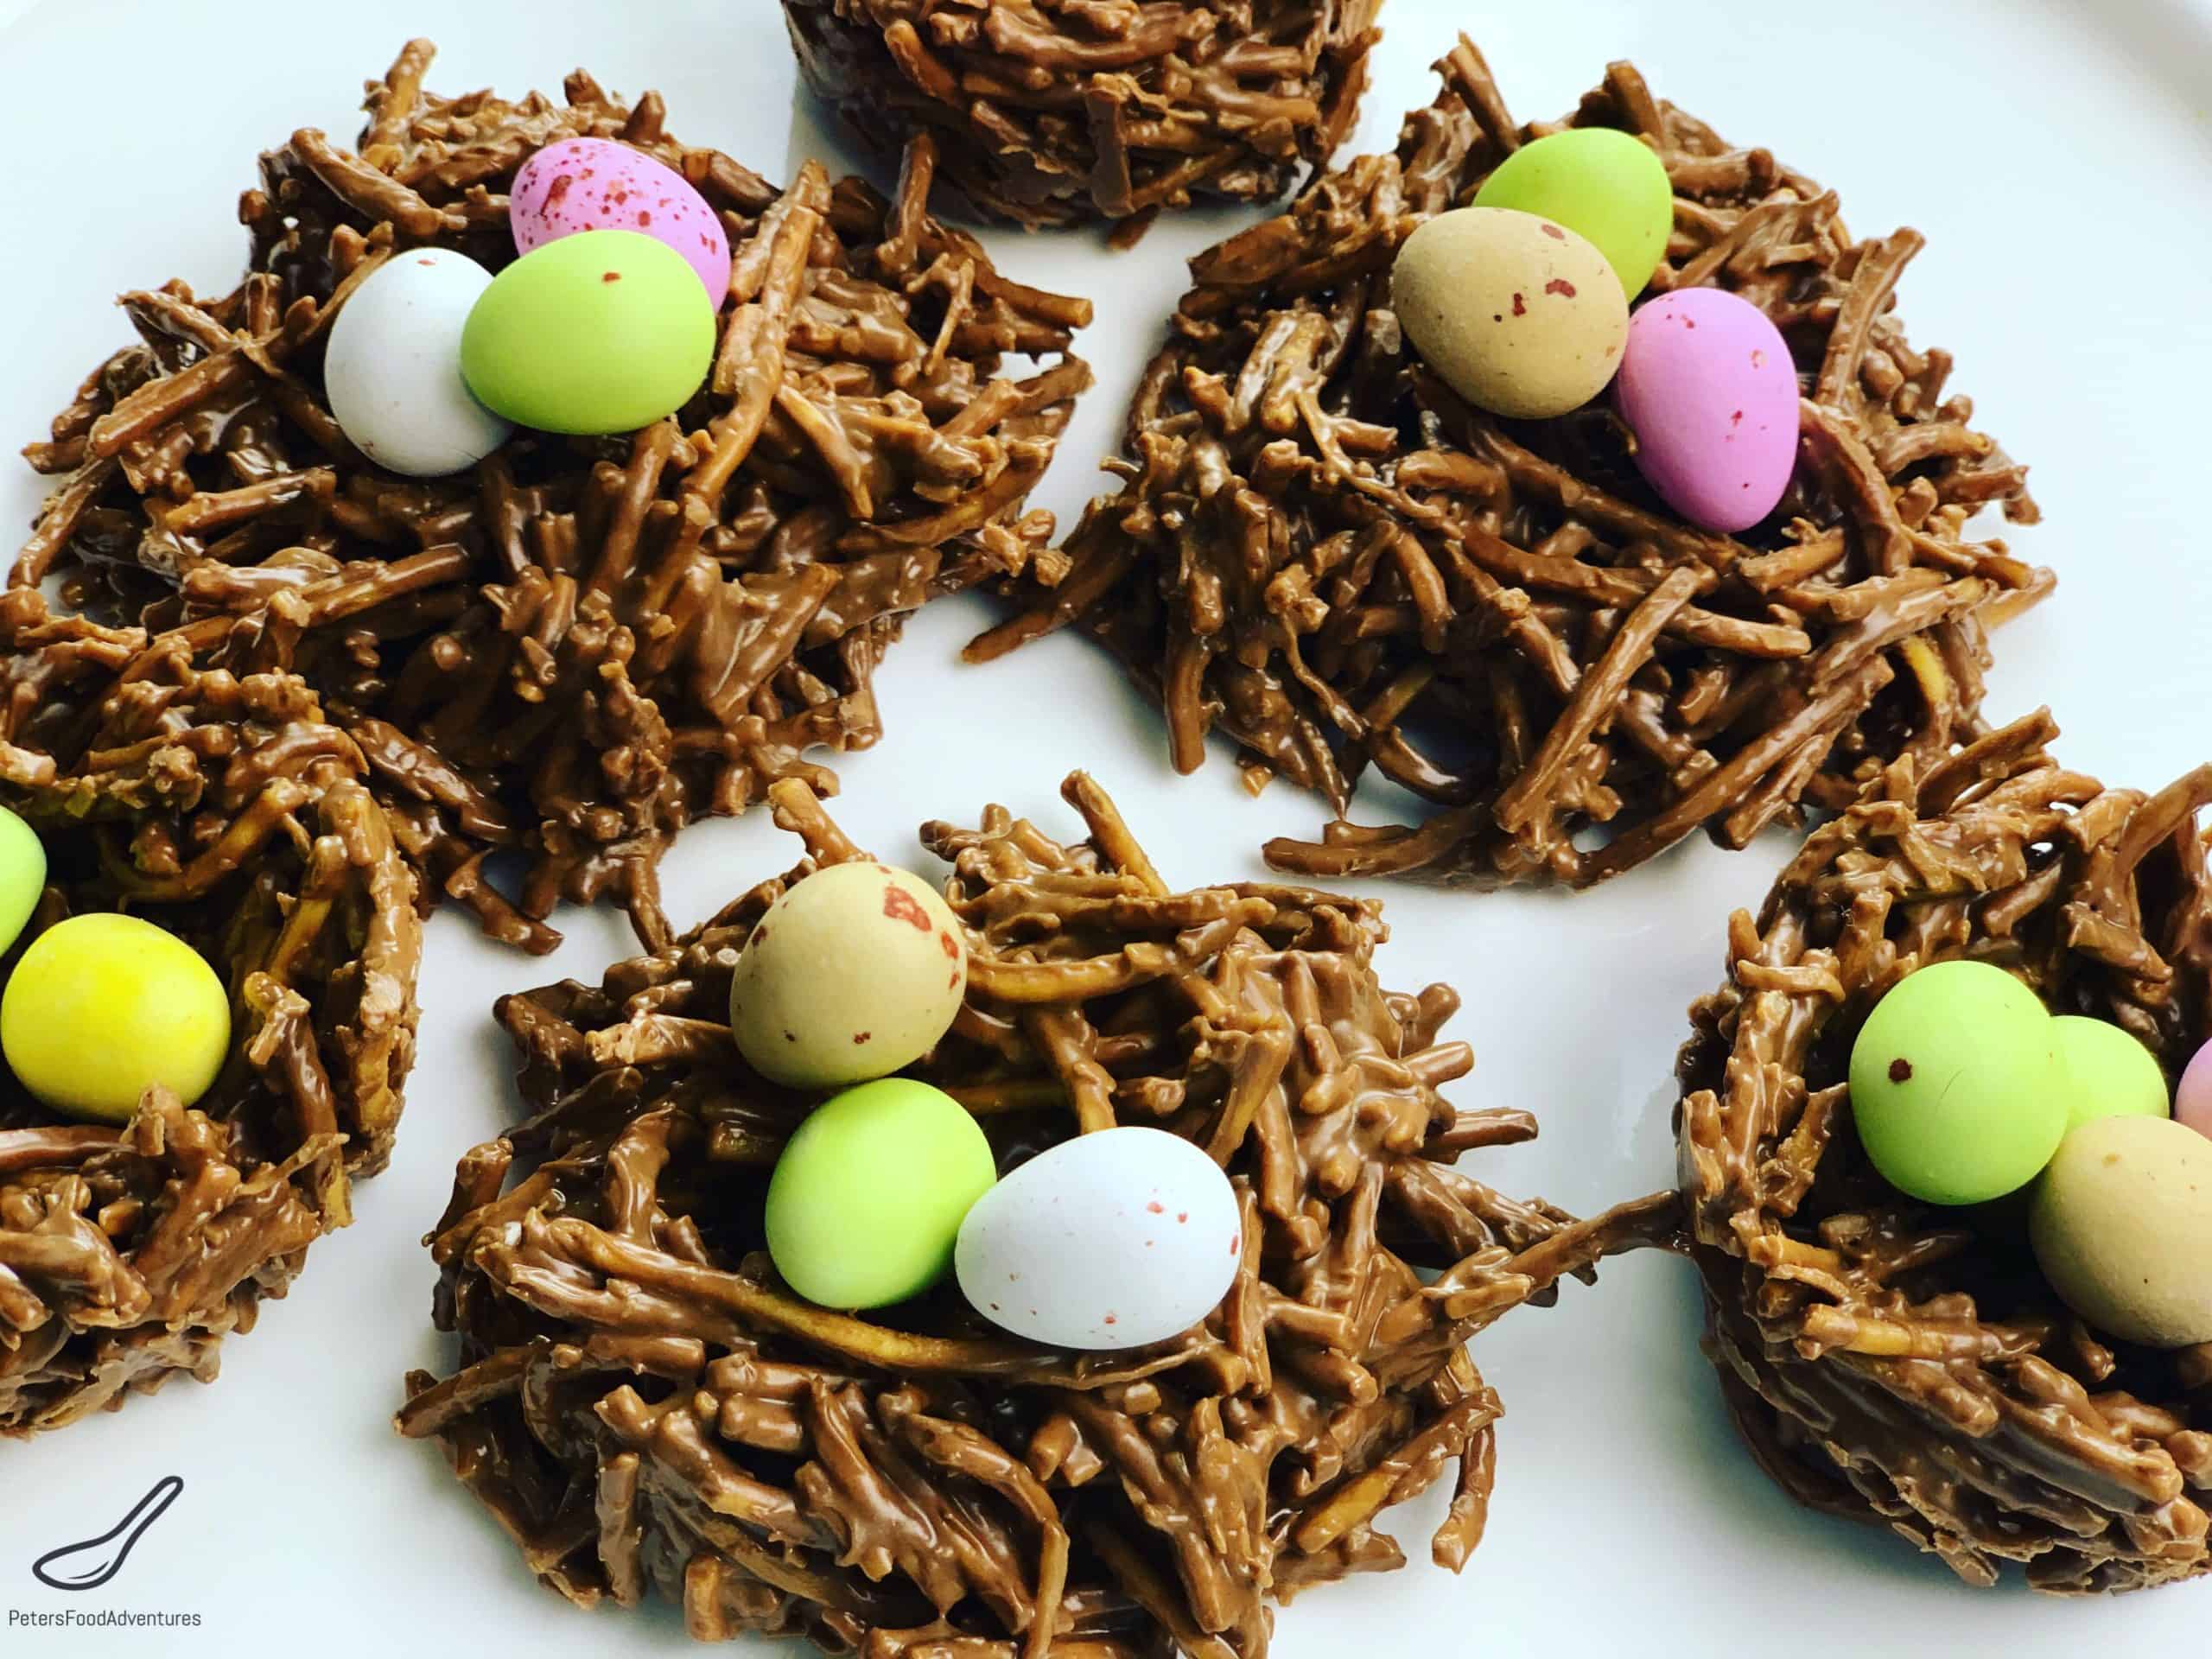 Easy to make, Chocolate Chow Mein Birds Nest Cookies are the perfect Easter and springtime treat. Fun to make and a big hit with your kids! 